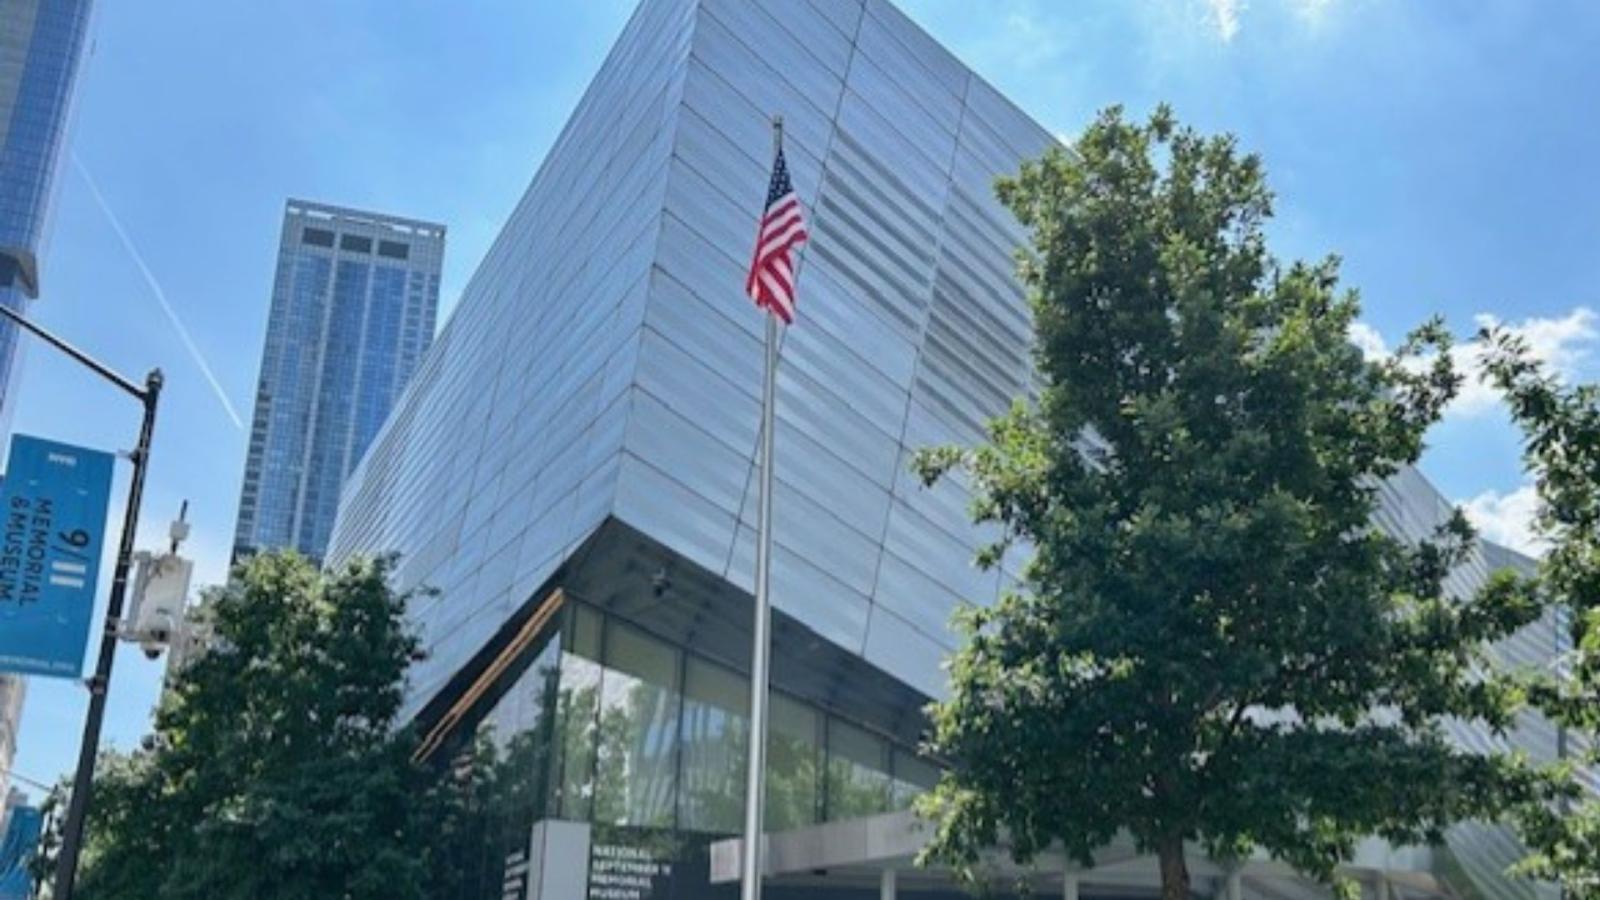 Exterior of the 9/11 Memorial Museum, with an American flag visible in the foreground